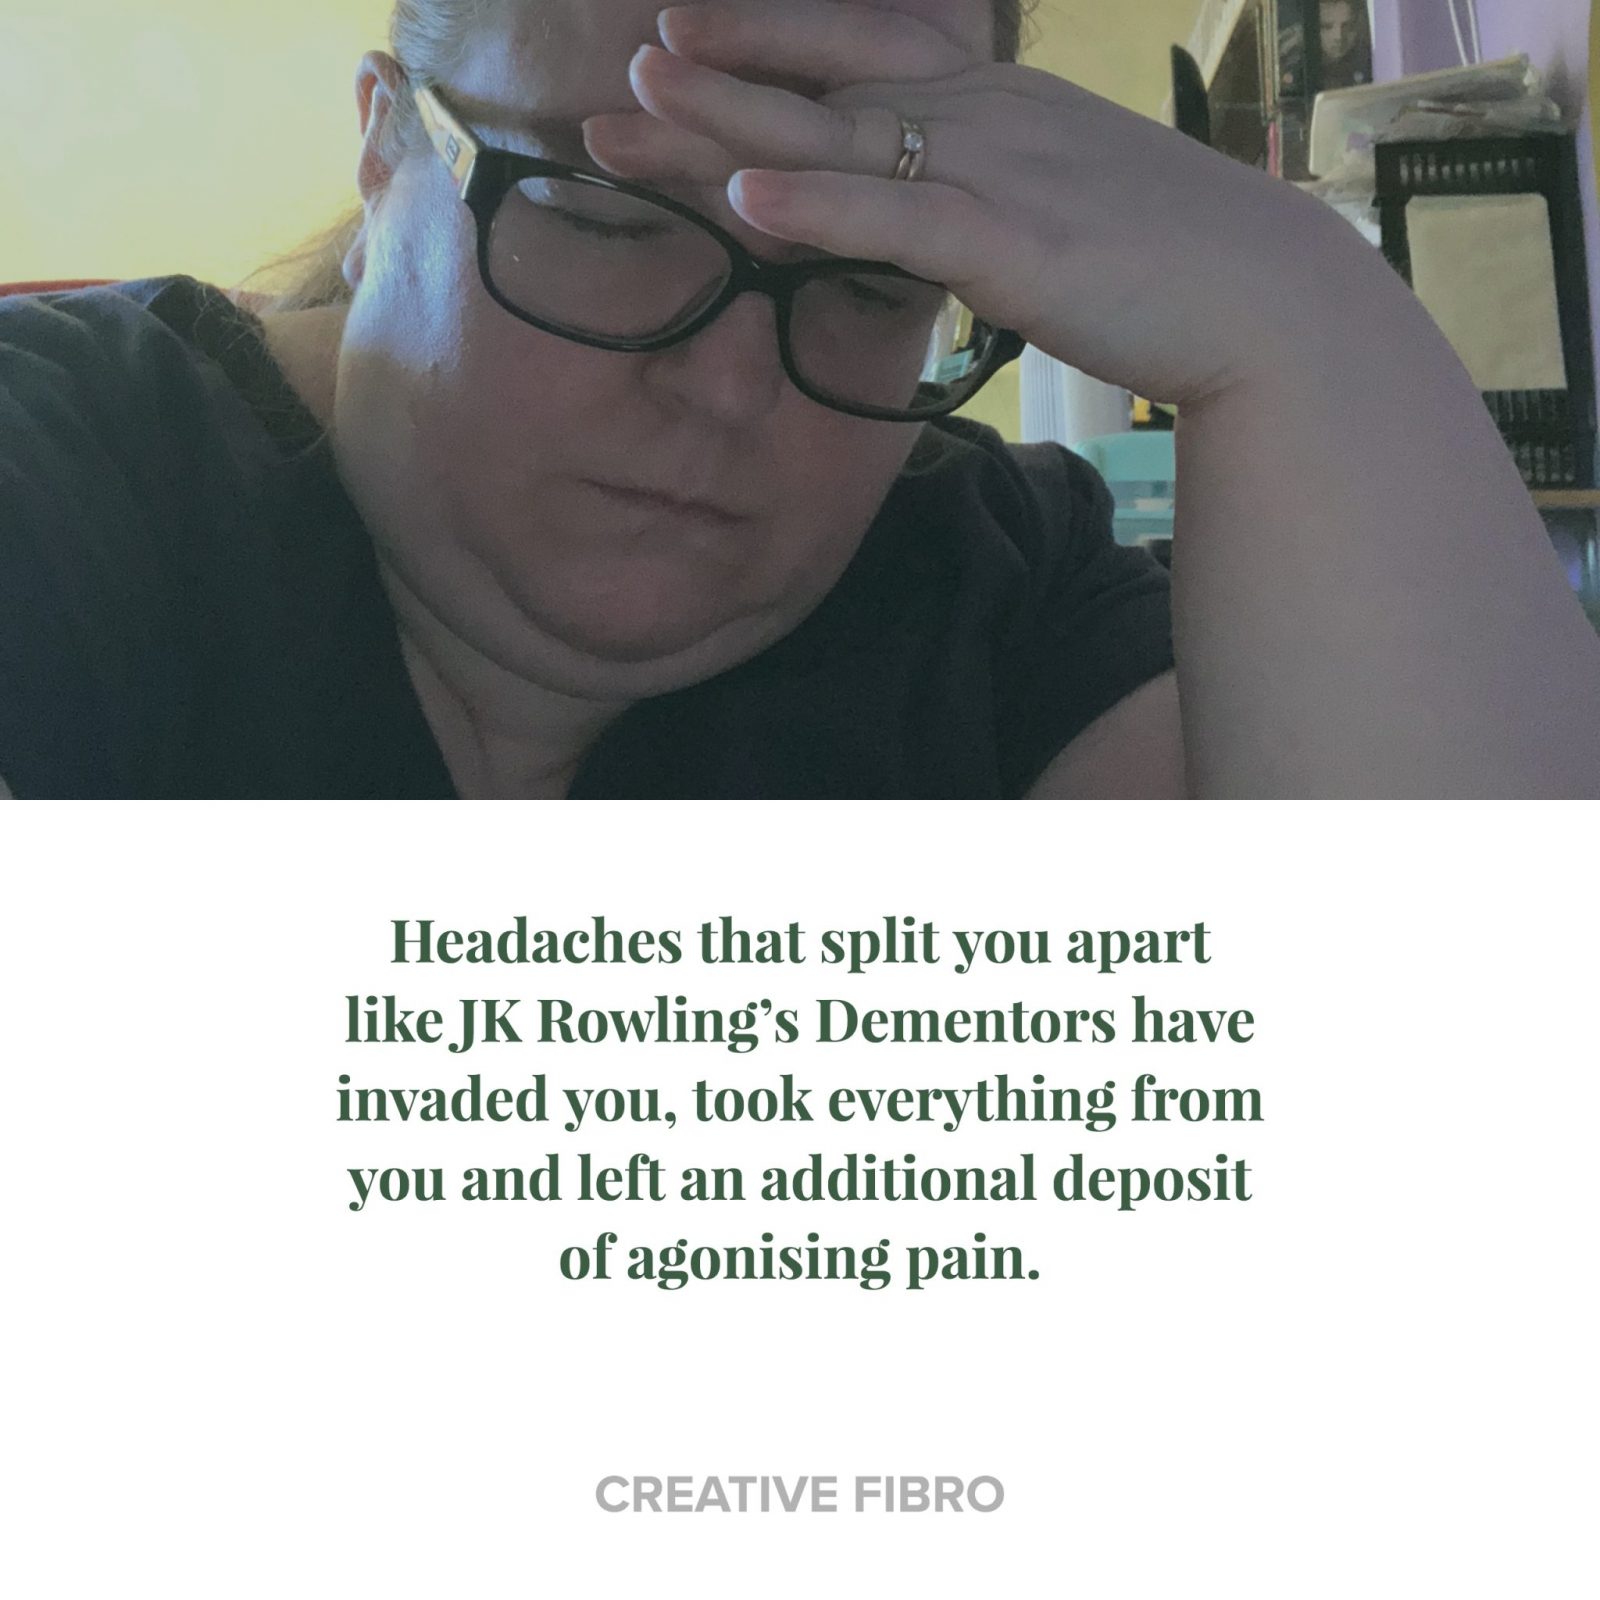 Living Creatively with Fibro | An image of me holding my head with the words "Headaches that split you apart like JK Rowling’s Dementors have invaded you, took everything from you and left an additional deposit of agonising pain."